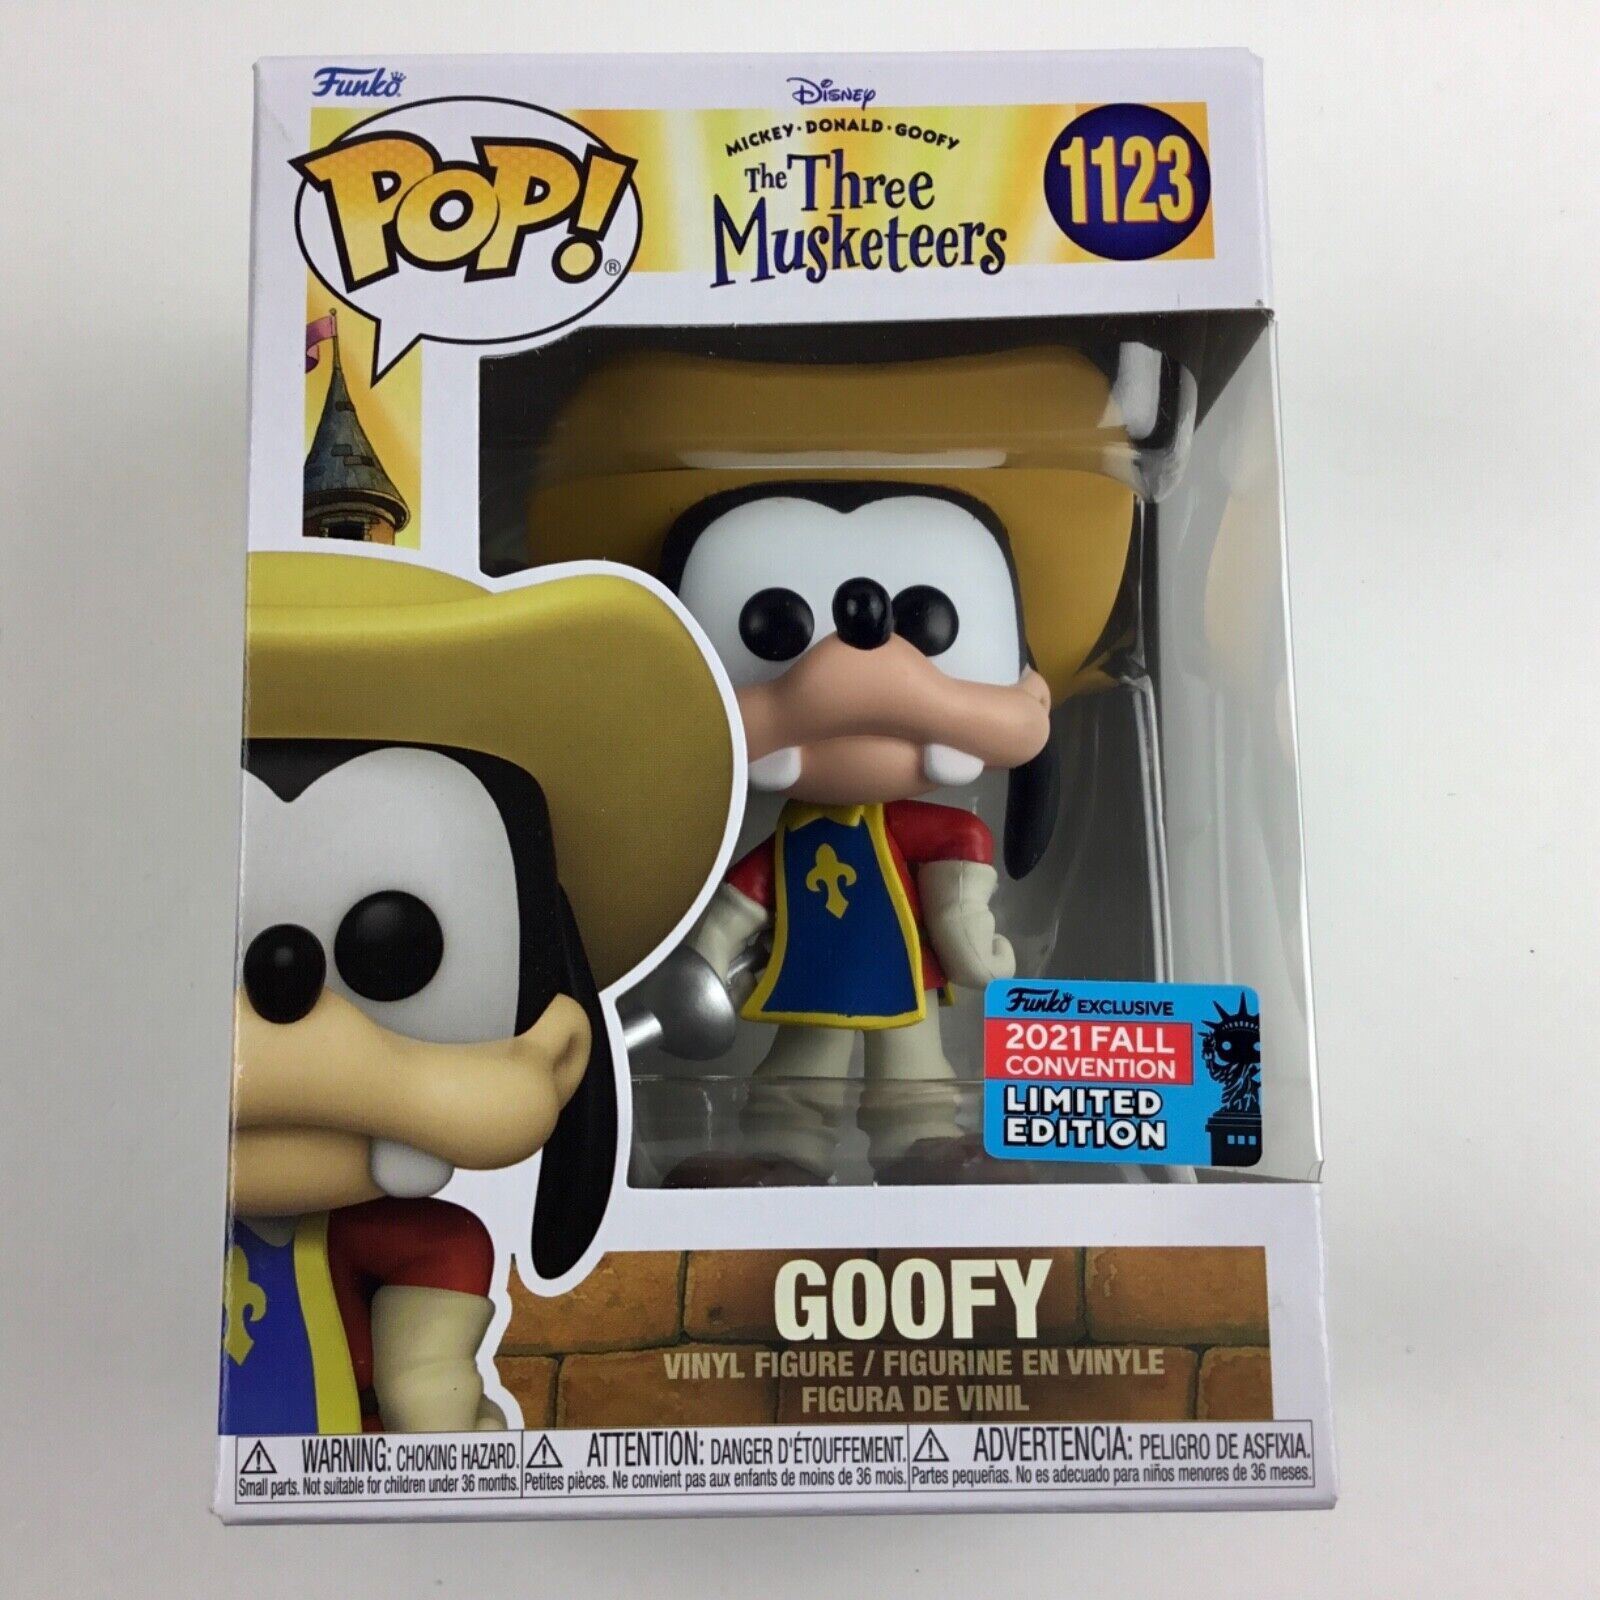 Funko Pop GOOFY THE THREE MUSKETEERS 2021 NYCC Convention Exclusive Disney 1123